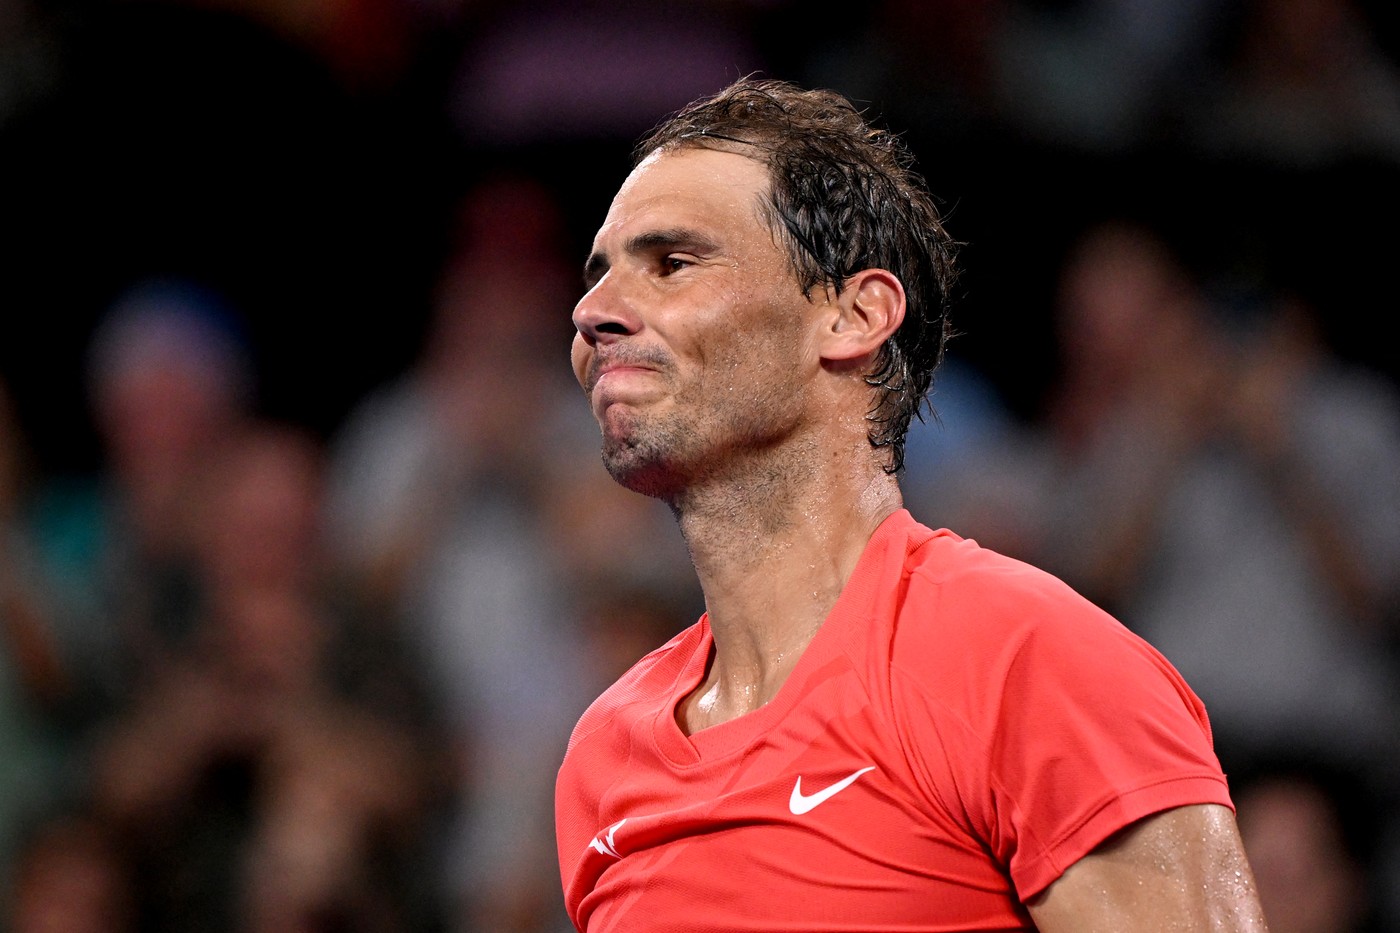 (FILES) Spain's Rafael Nadal celebrates victory after his men's singles match against Jason Kubler of Australia at the Brisbane International tennis tournament in Brisbane on January 4, 2024. Rafael Nadal announced on April 4, 2024 his withdrawal from the Masters 1000 in Monte-Carlo, which begins on April 7, 2024 as he is not being physically ready.,Image: 862401228, License: Rights-managed, Restrictions: --IMAGE RESTRICTED TO EDITORIAL USE - STRICTLY NO COMMERCIAL USE--, Model Release: no, Credit line: William WEST / AFP / Profimedia